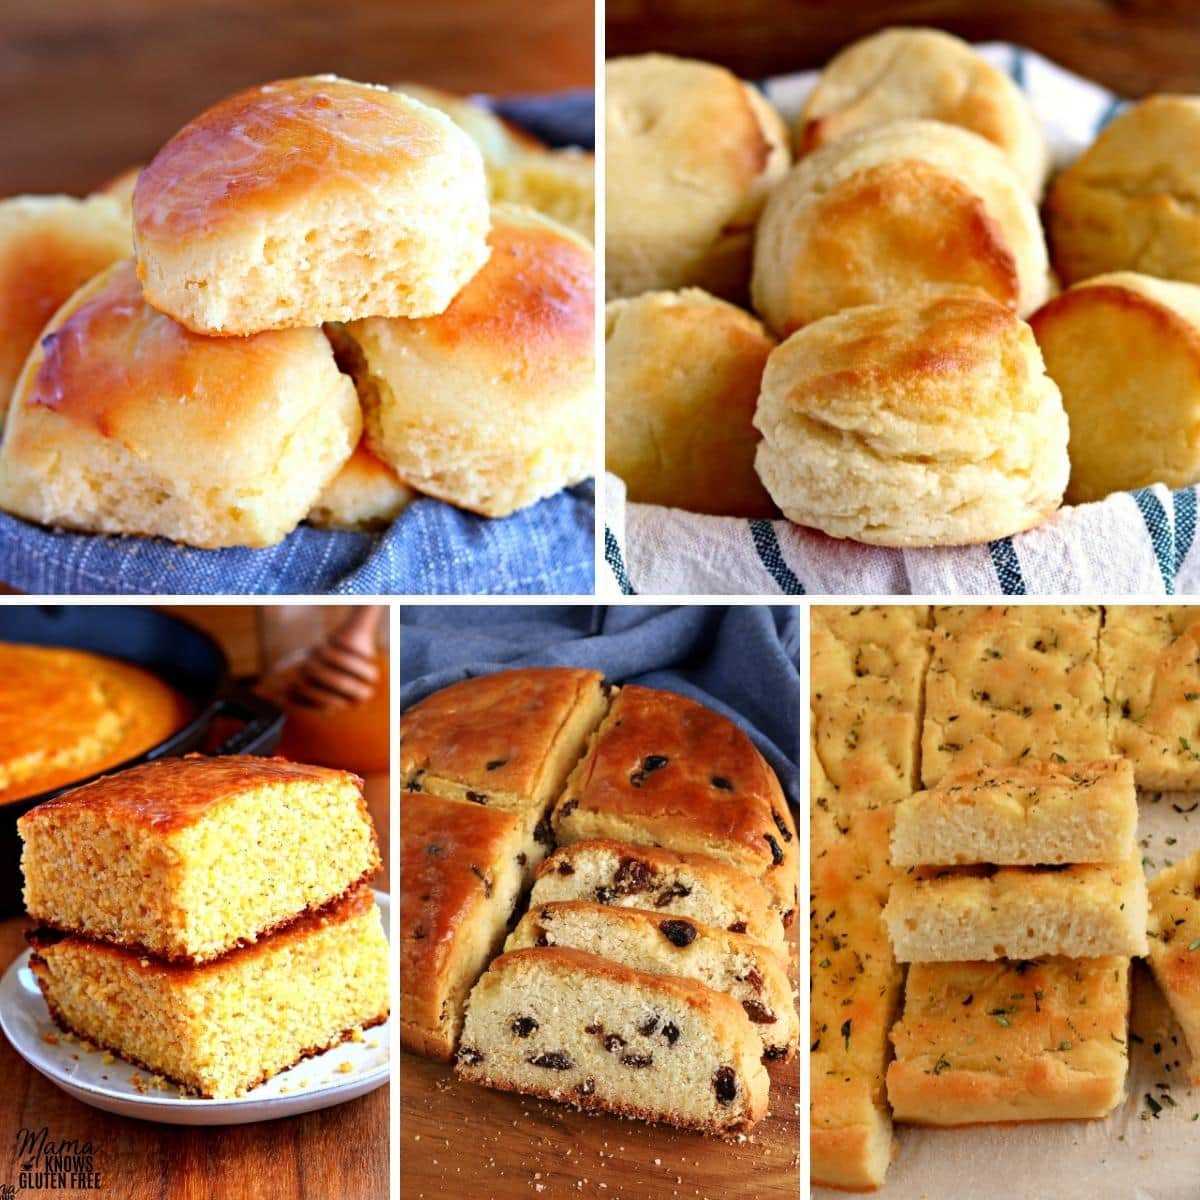 gluten-free East bread recipes photo collage